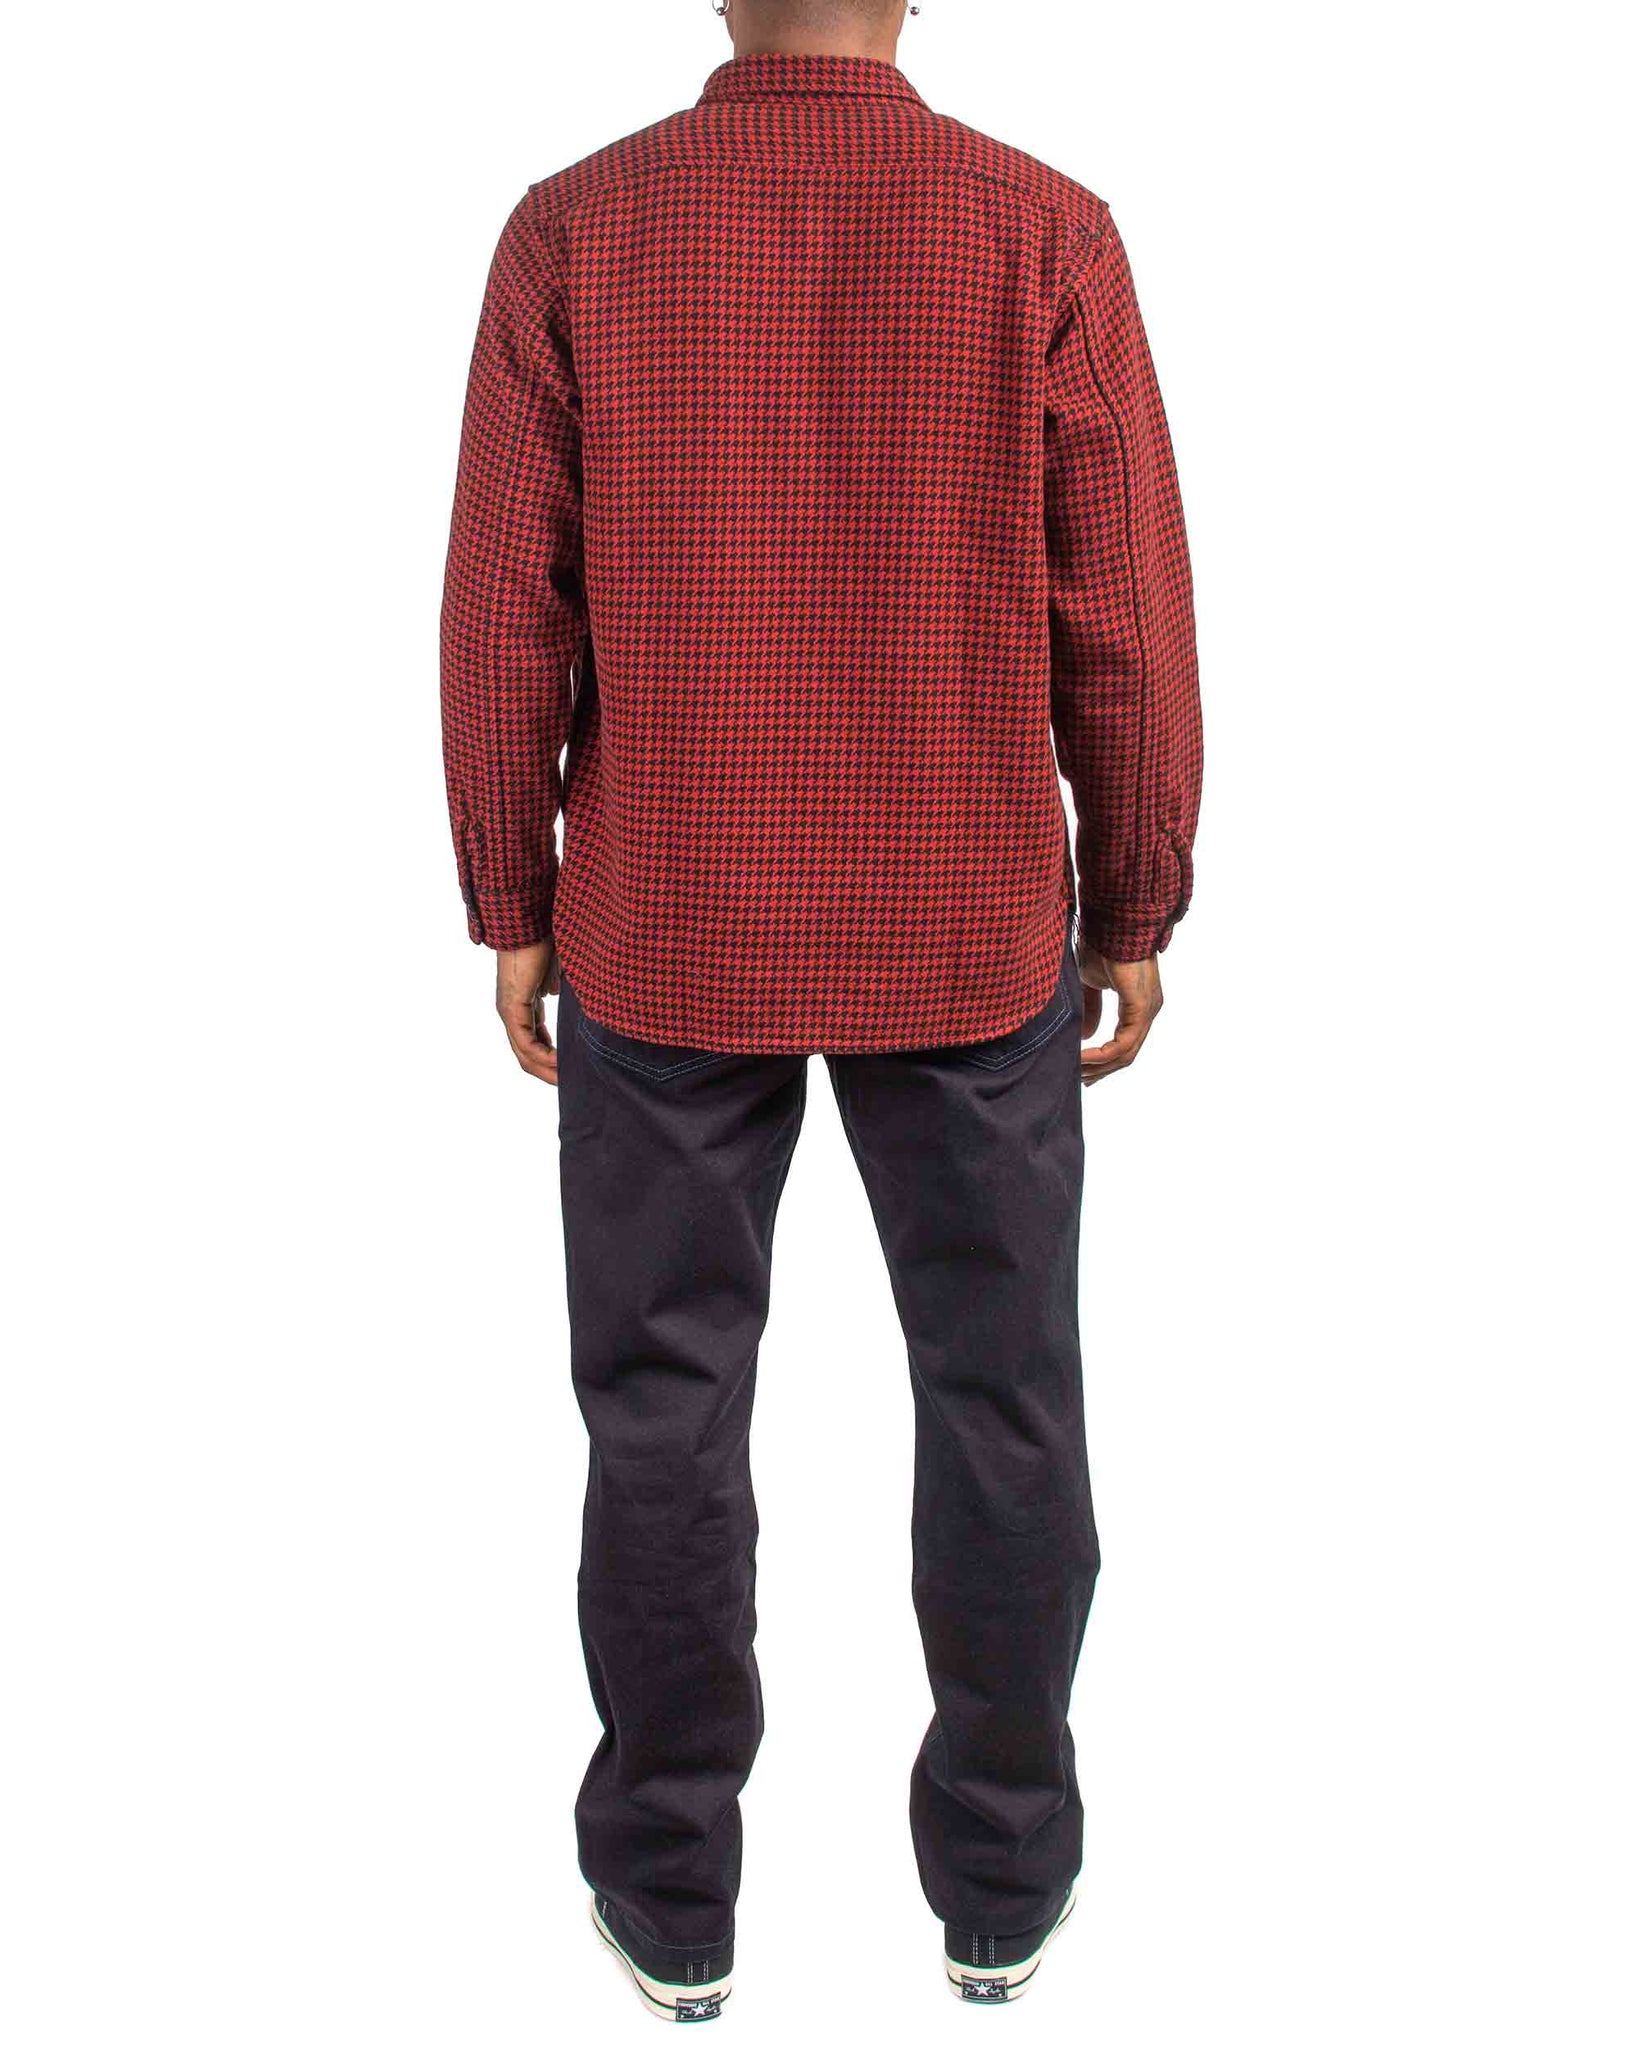 The Real McCoy's MS21102 8HU Houndstooth Flannel Shirt Red Back